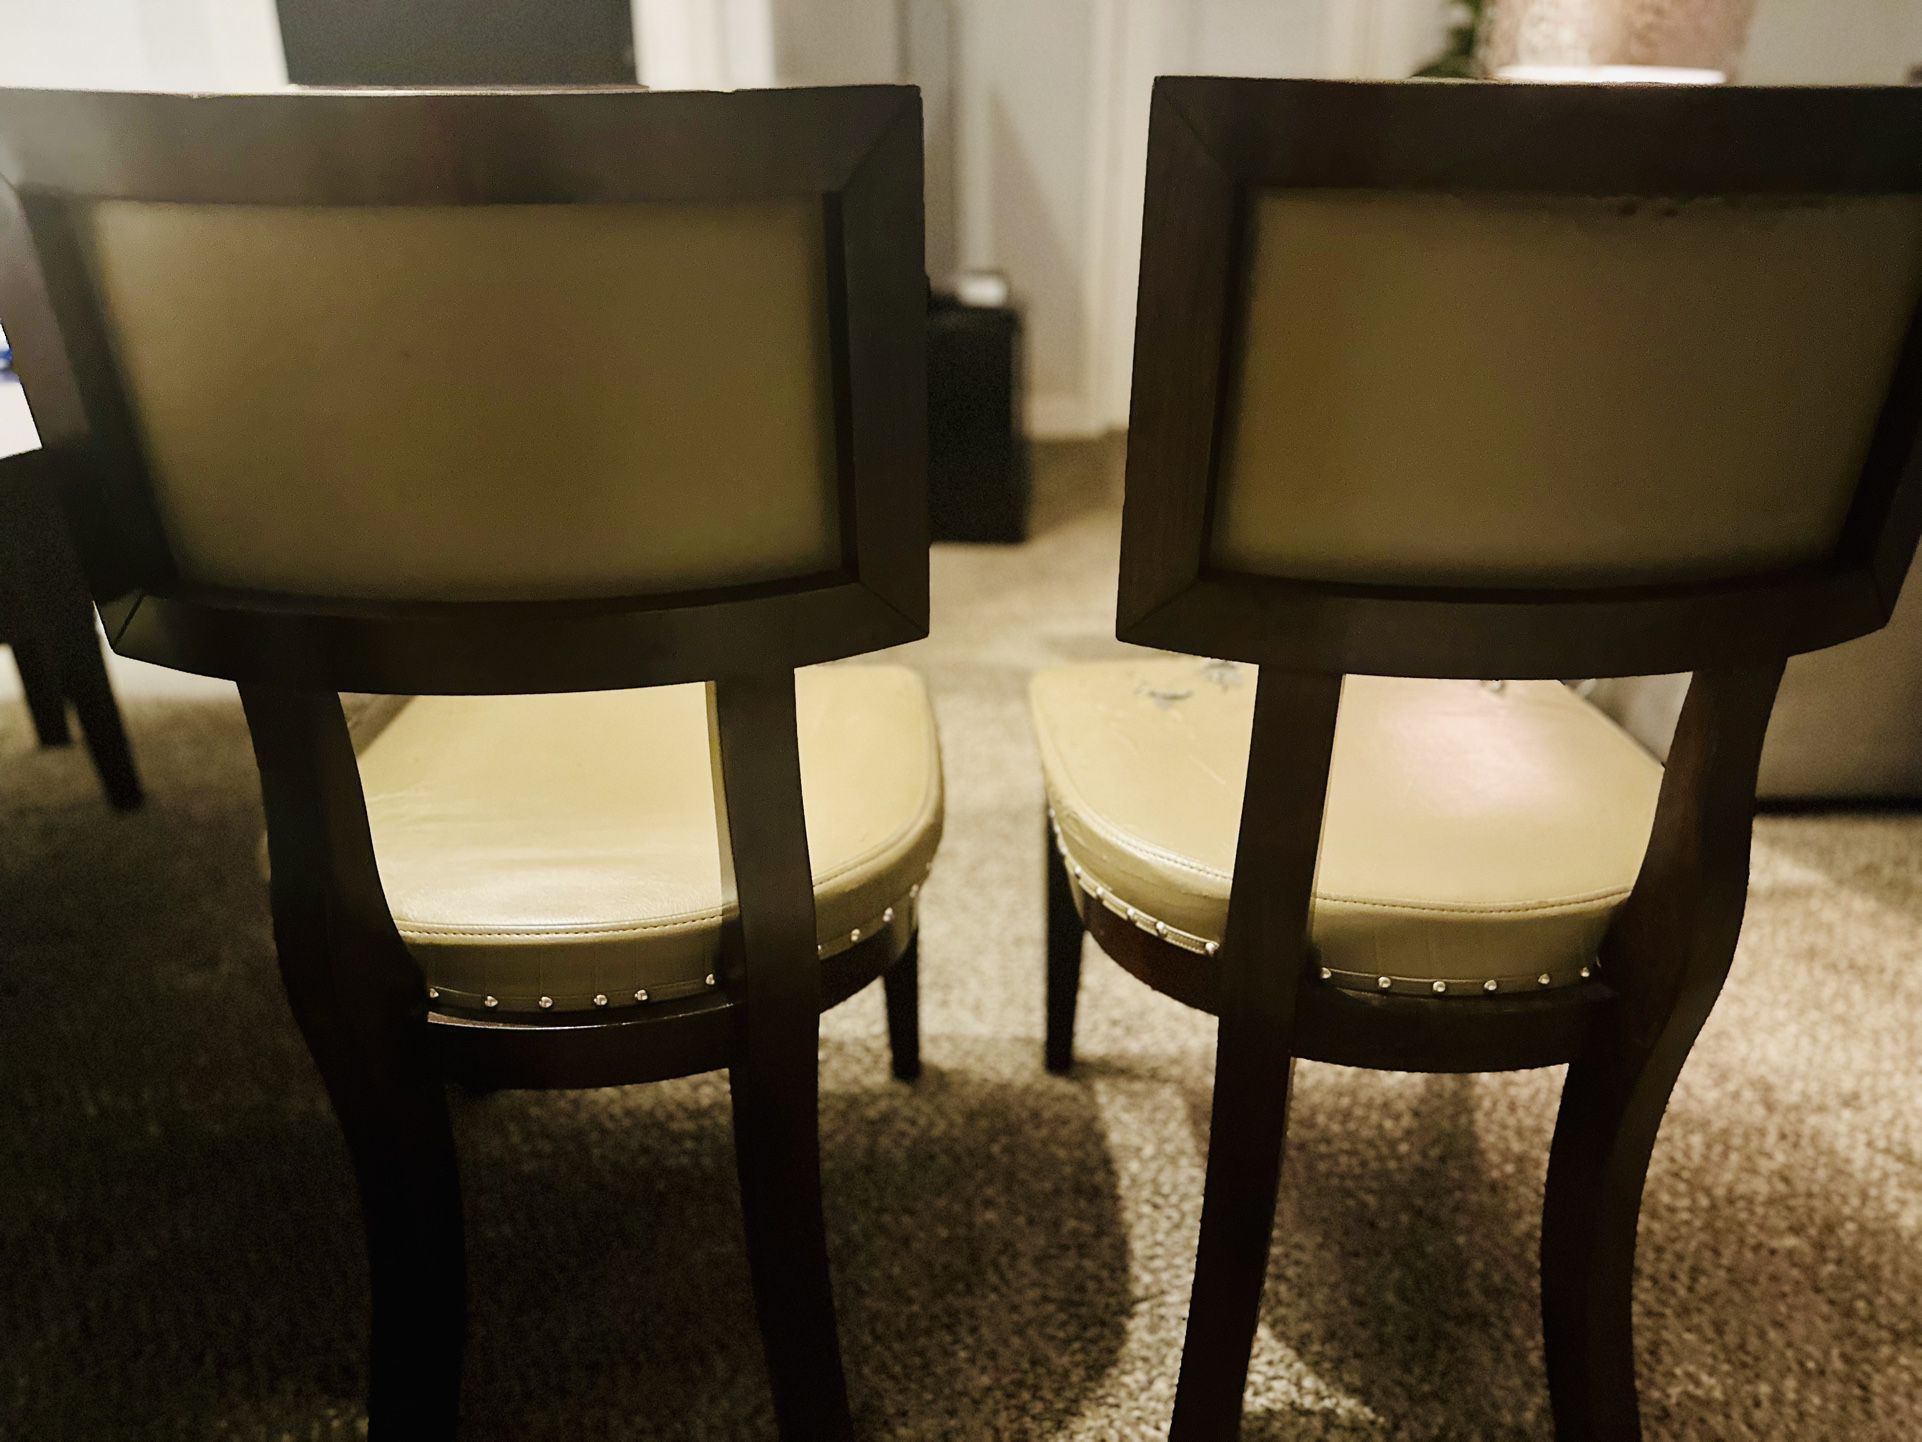 Dining Table Chairs All 4 For $30